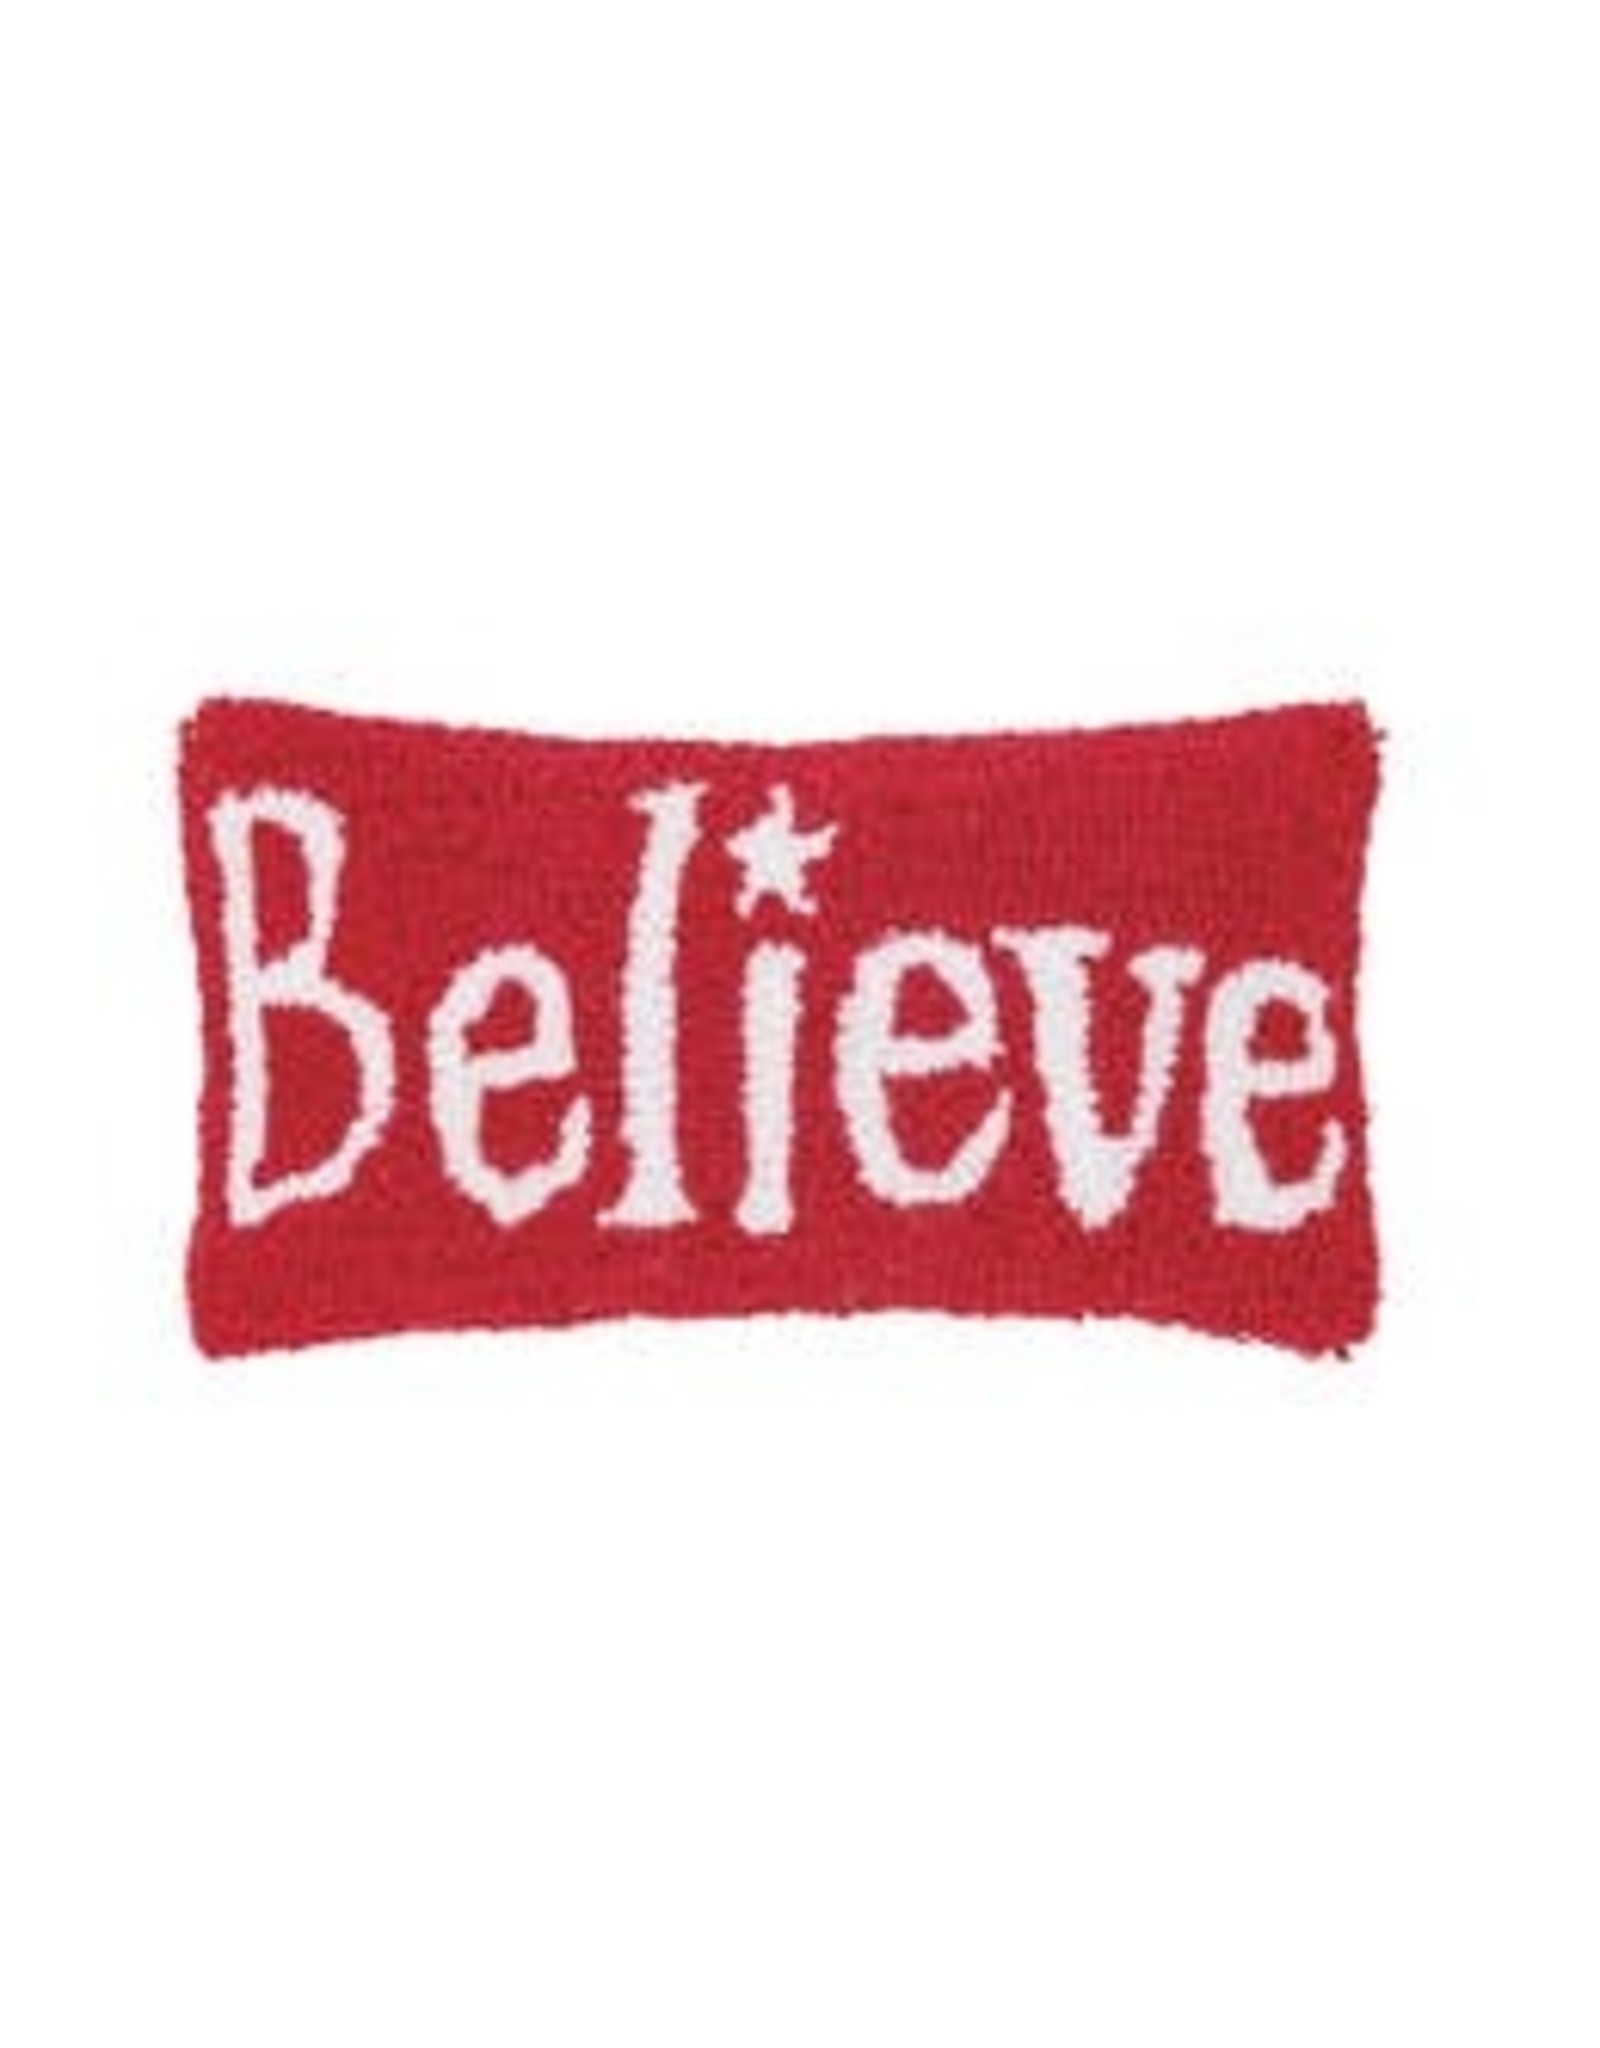 Believe-Hooked 6x12 Gift Pillow